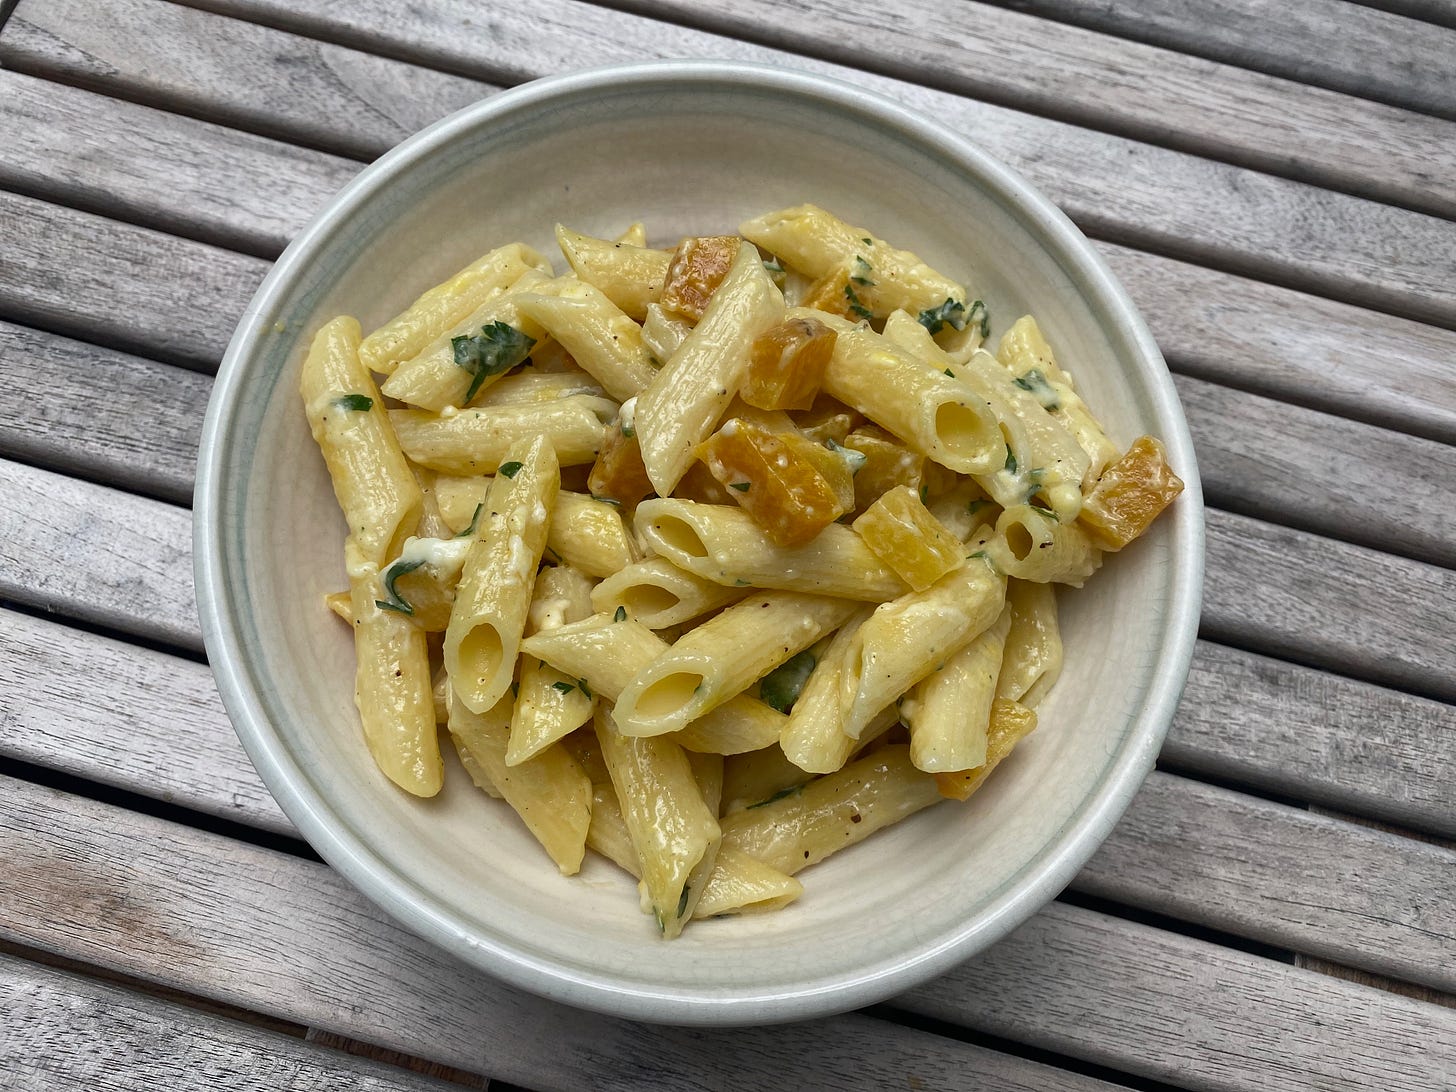 A while ceramic bowl filled with cheesy penne and cubes of roasted golden beets.